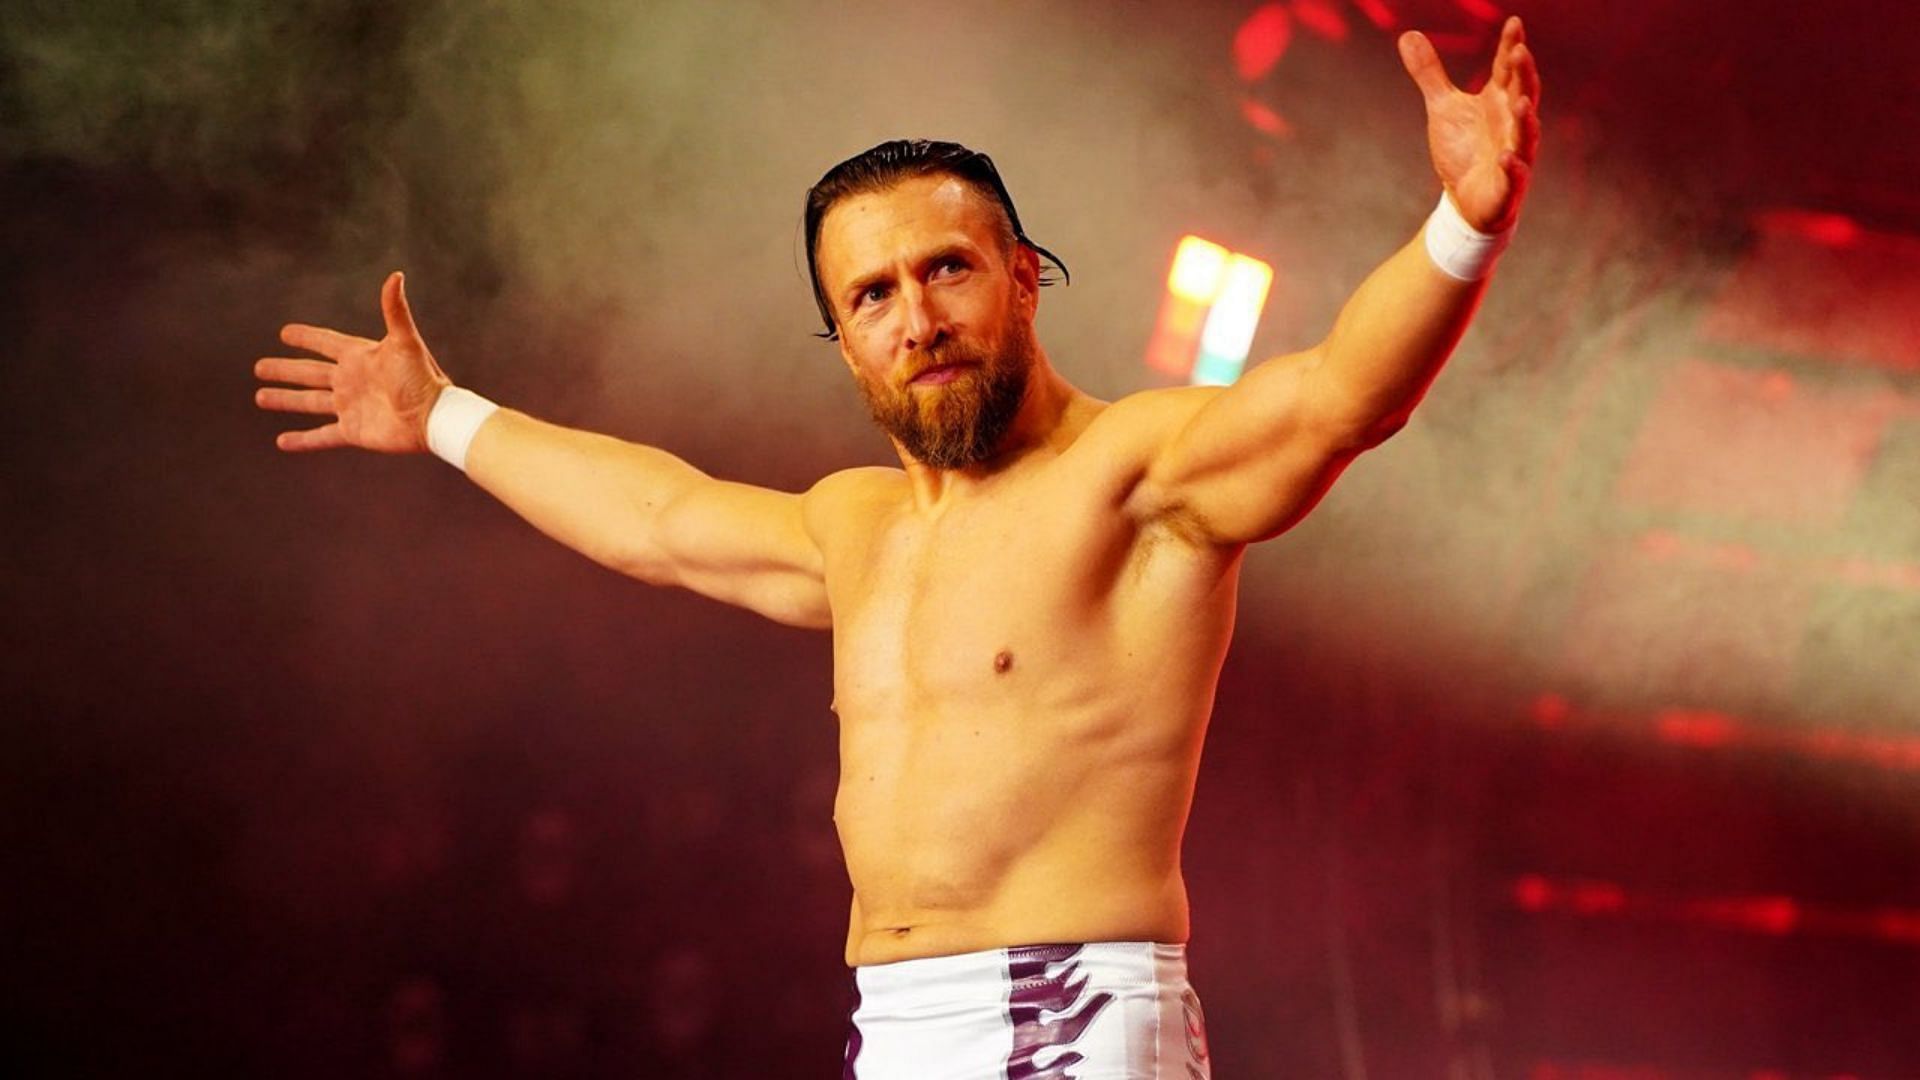 What advice does Bryan Danielson have for younger wrestlers?